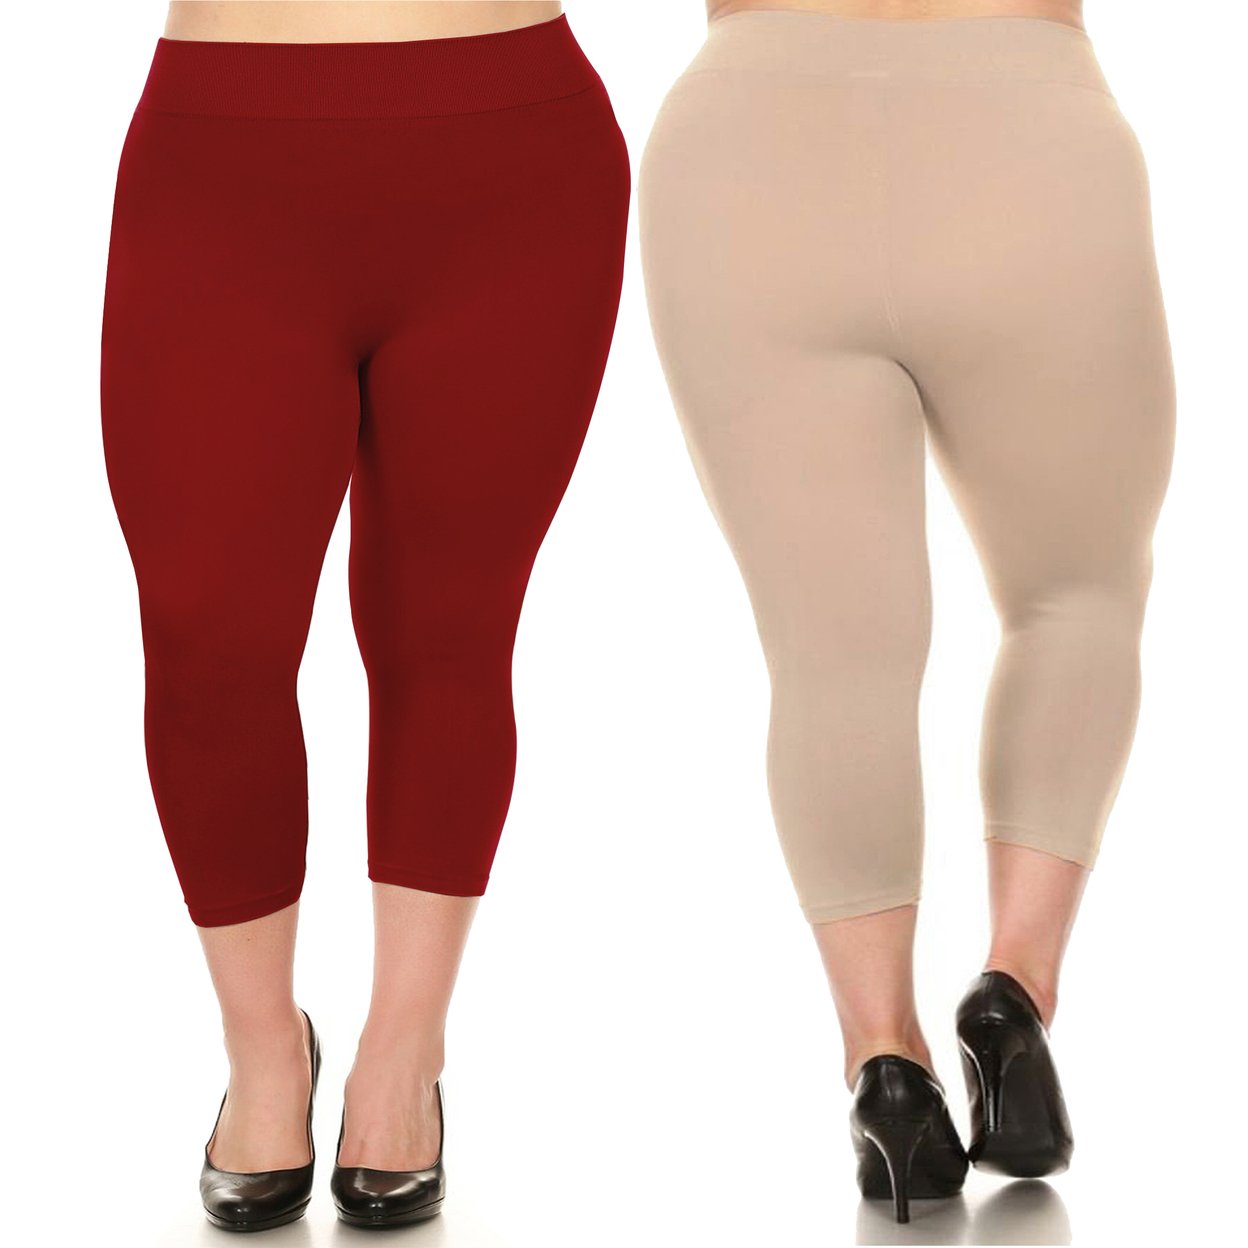 2-Pack: Women's Ultra-Soft High Waisted Smooth Stretch Active Yoga Capri Leggings Plus Size Available - Beige & Red, 3x